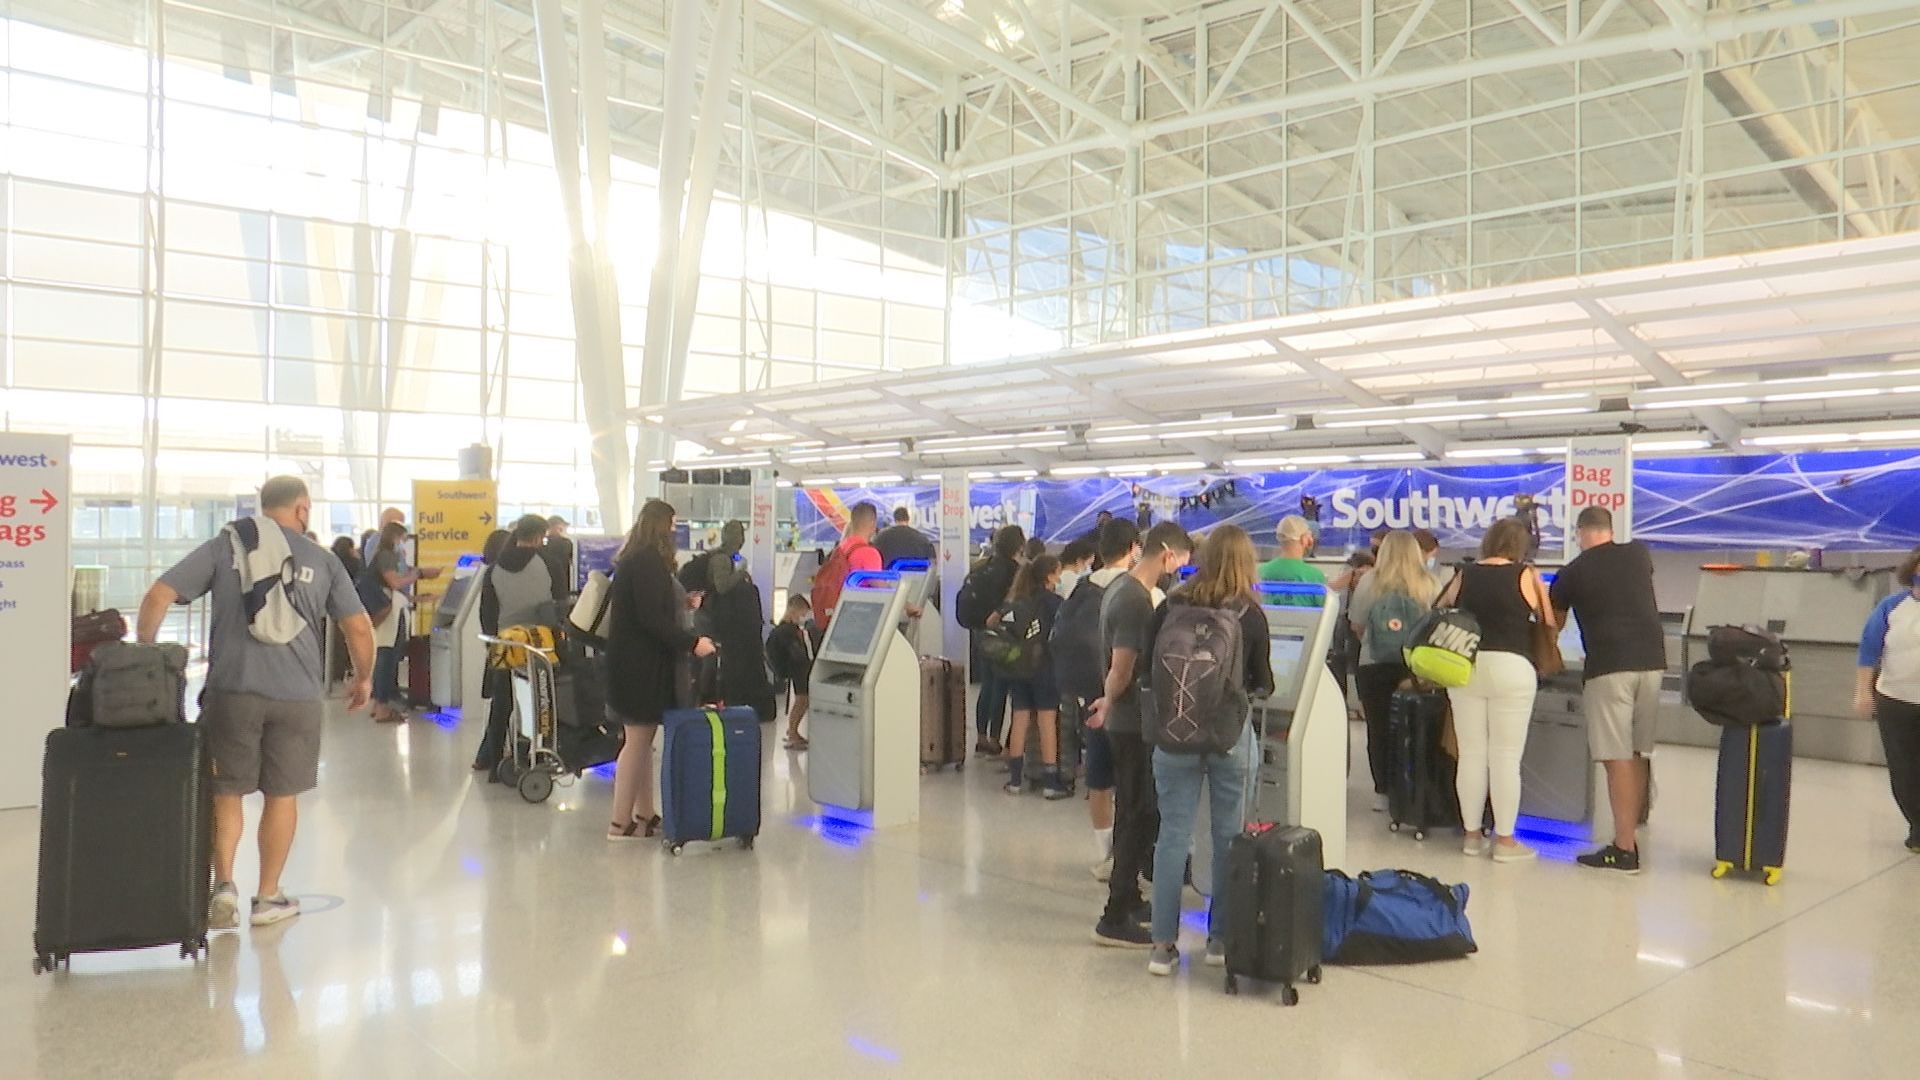 The hundreds of Southwest flight cancellations have turned some passengers' relaxing vacations into a nightmare.